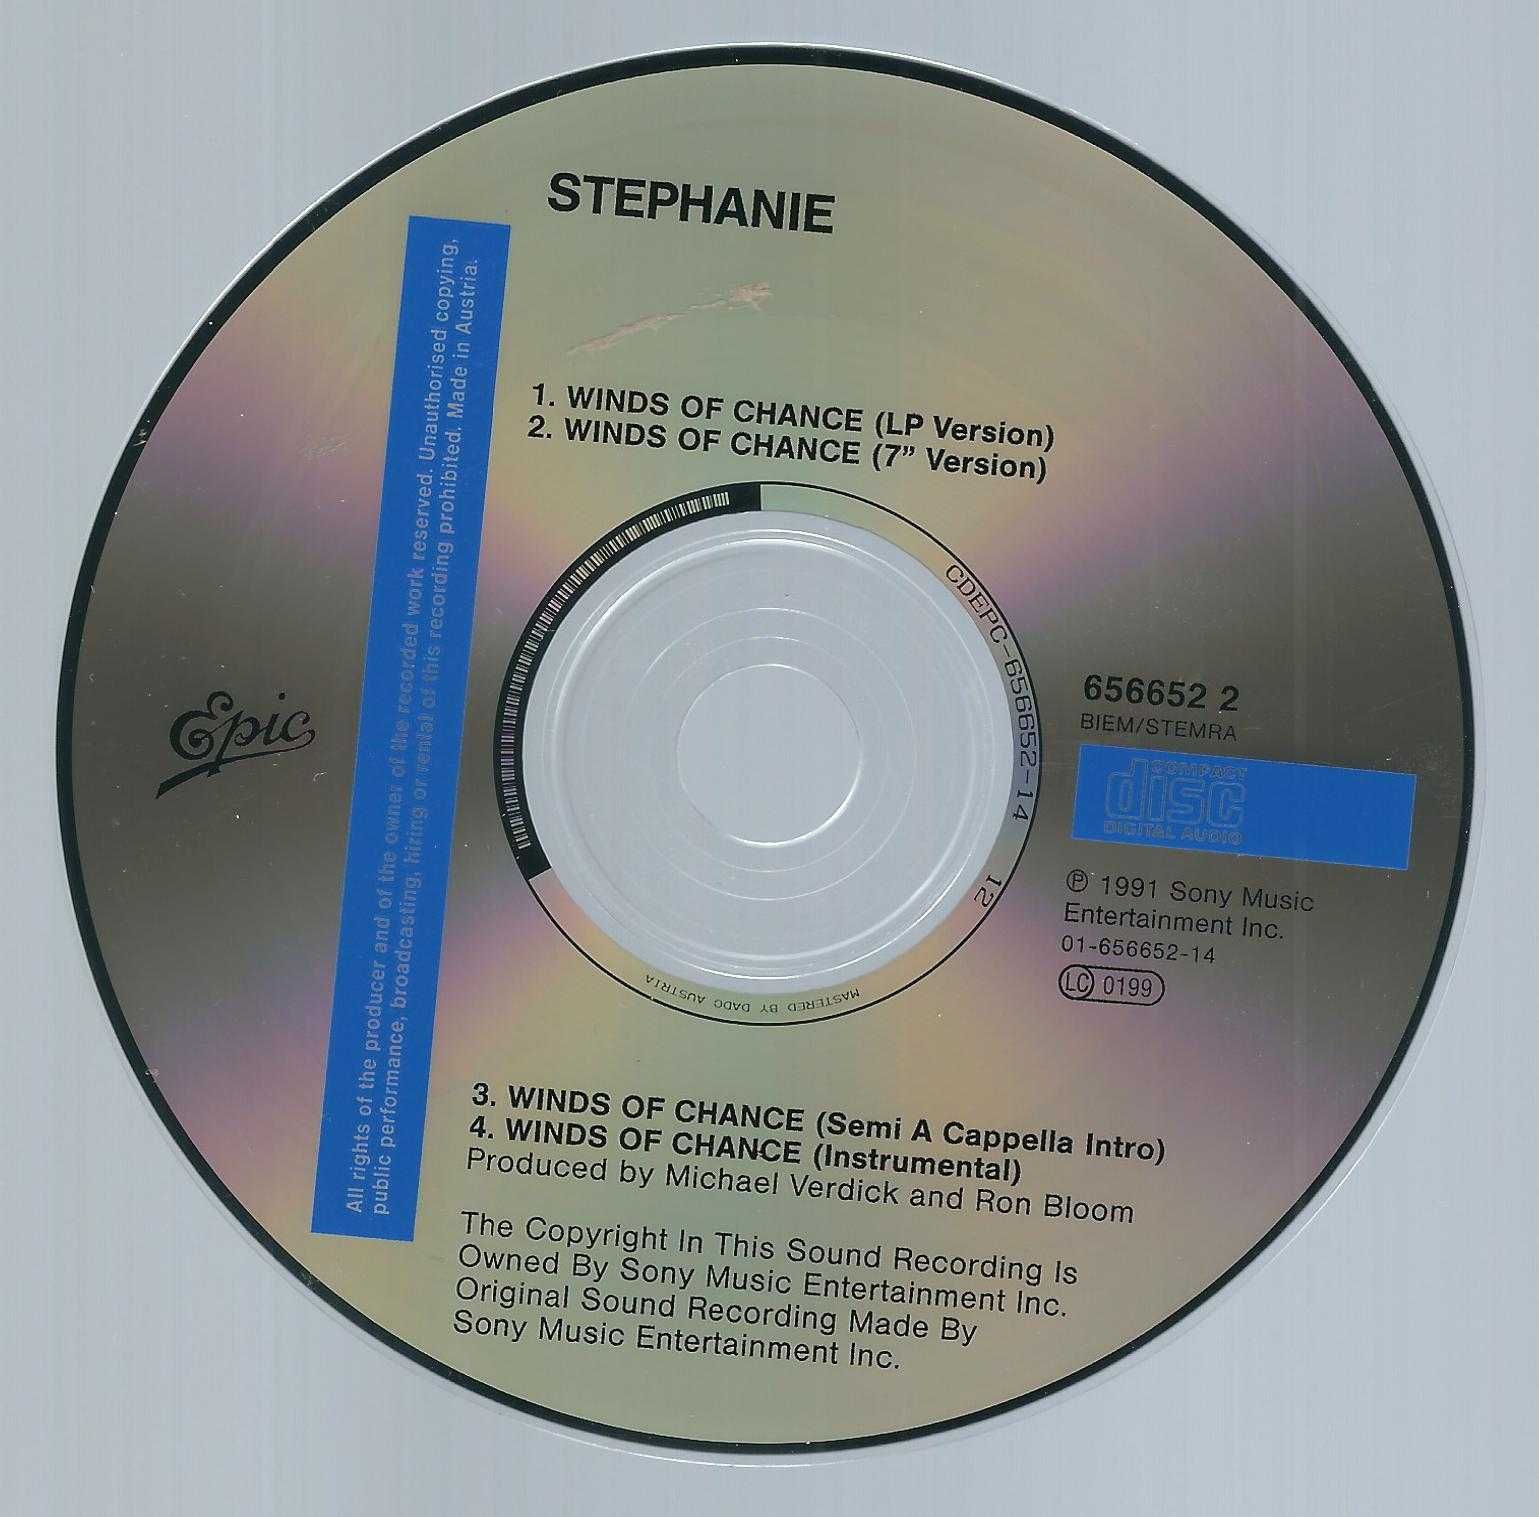 Maxi CD Stephanie - Winds Of Chance (1991) (Epic)